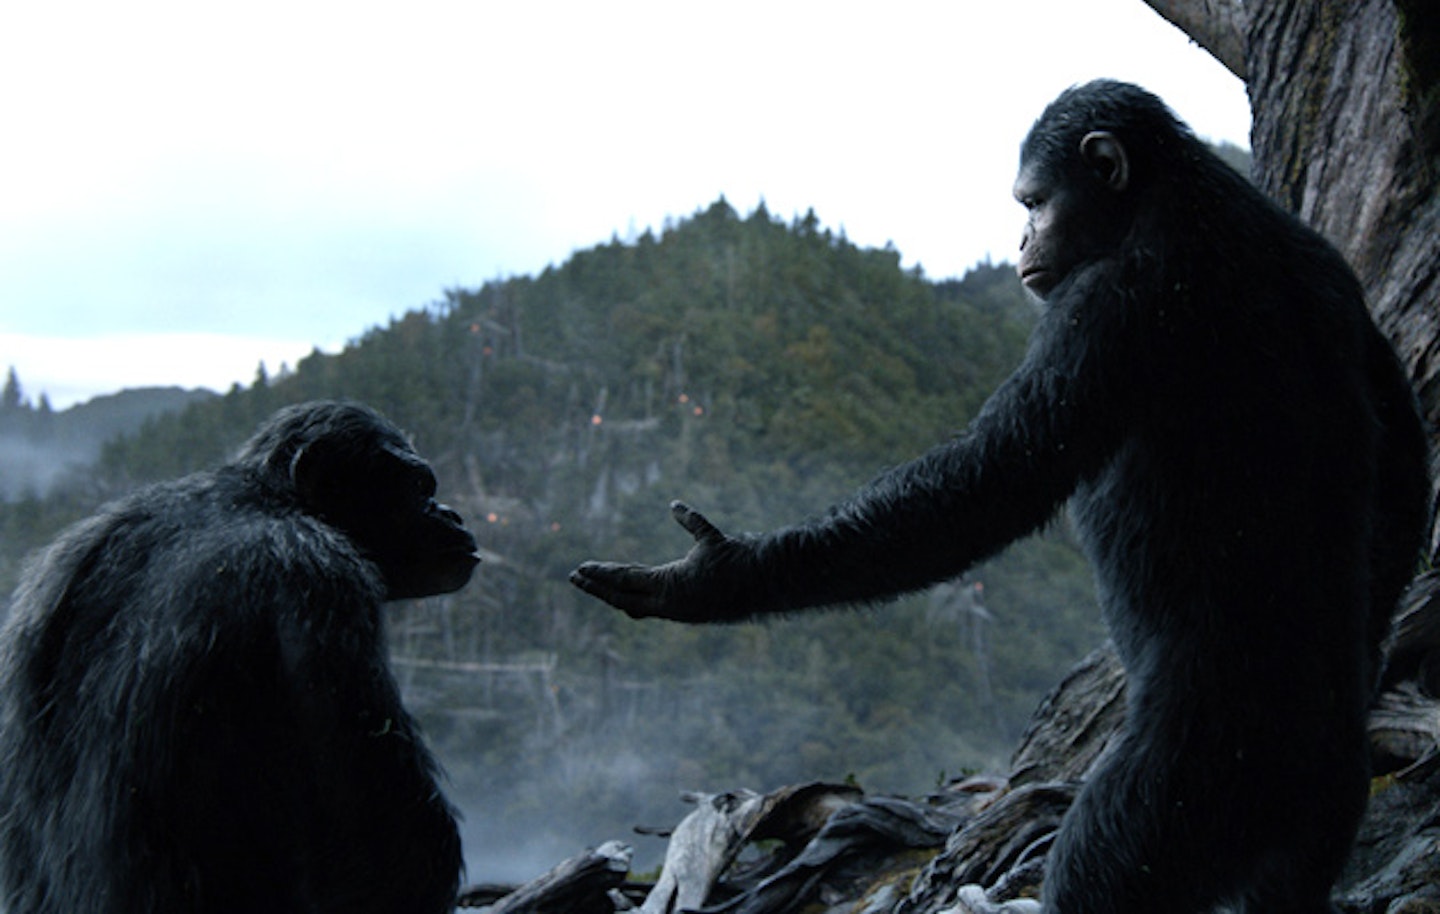 Worlds-first-look-at-dawn-of-planet-of-the-apes-footage